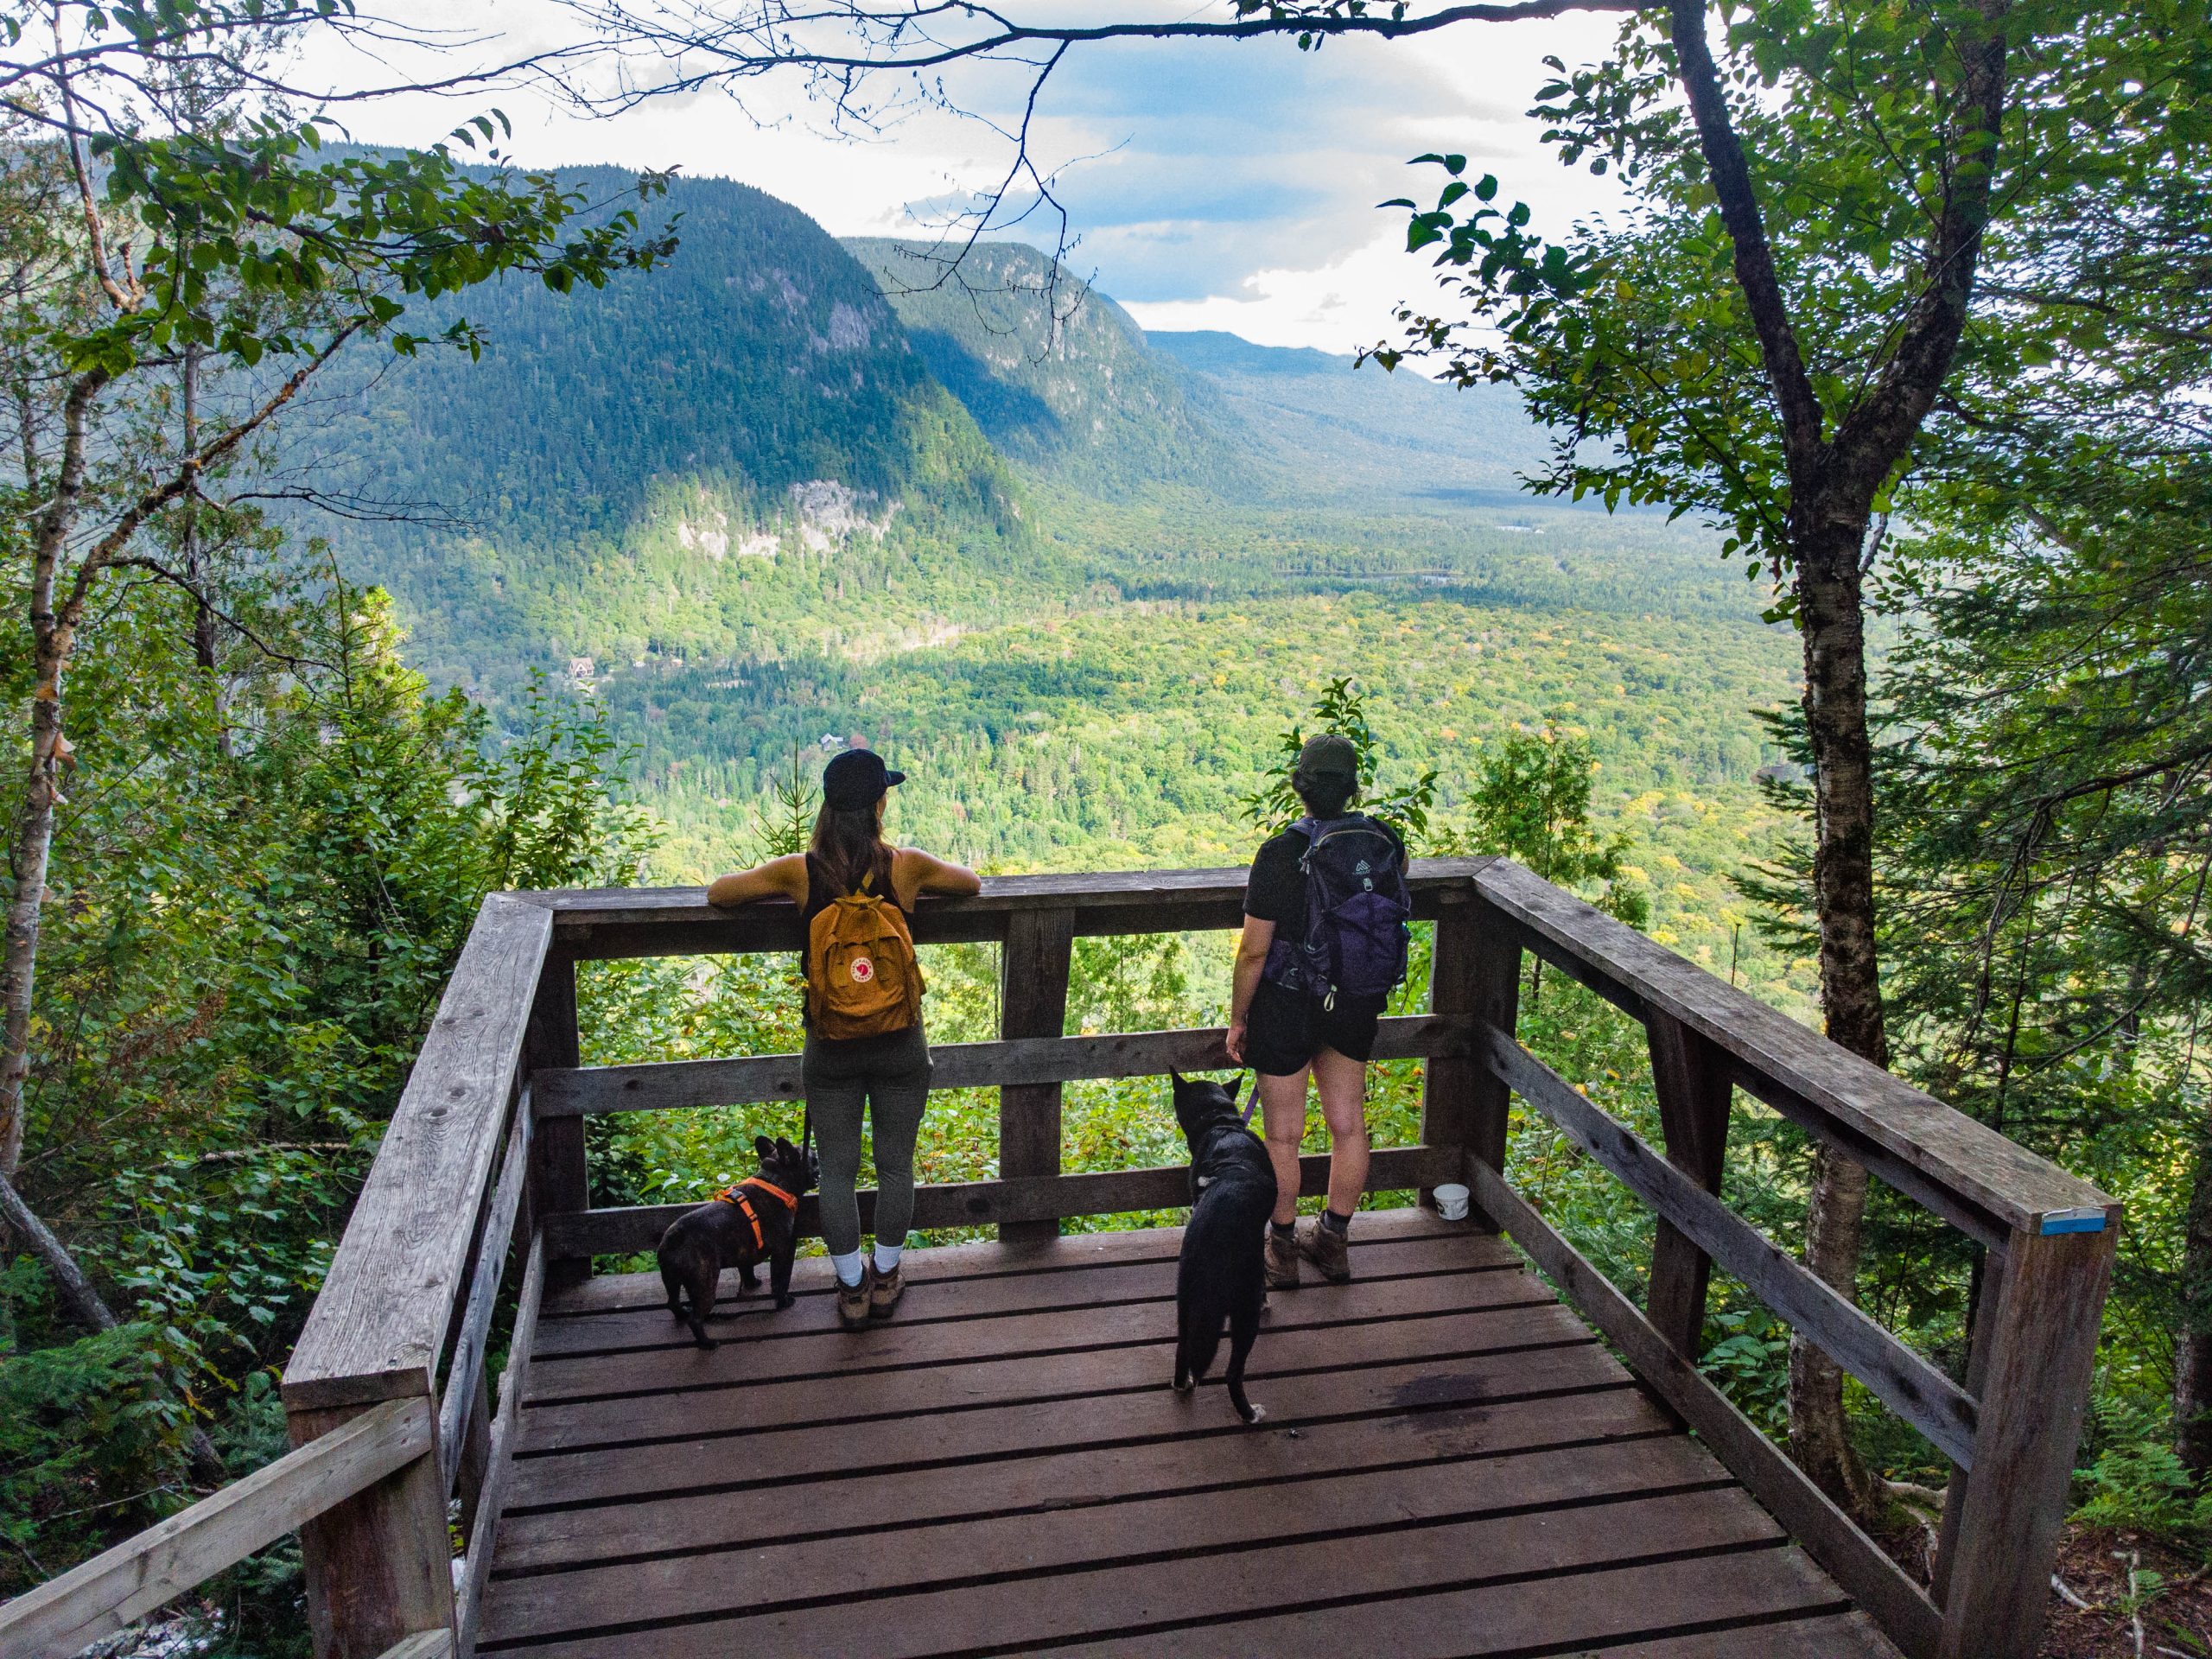 The Boucle de la Hauteur trail in summer, with a couple accompanied by their dogs, enjoying spectacular views of the nearby mountains and nature greener than ever.